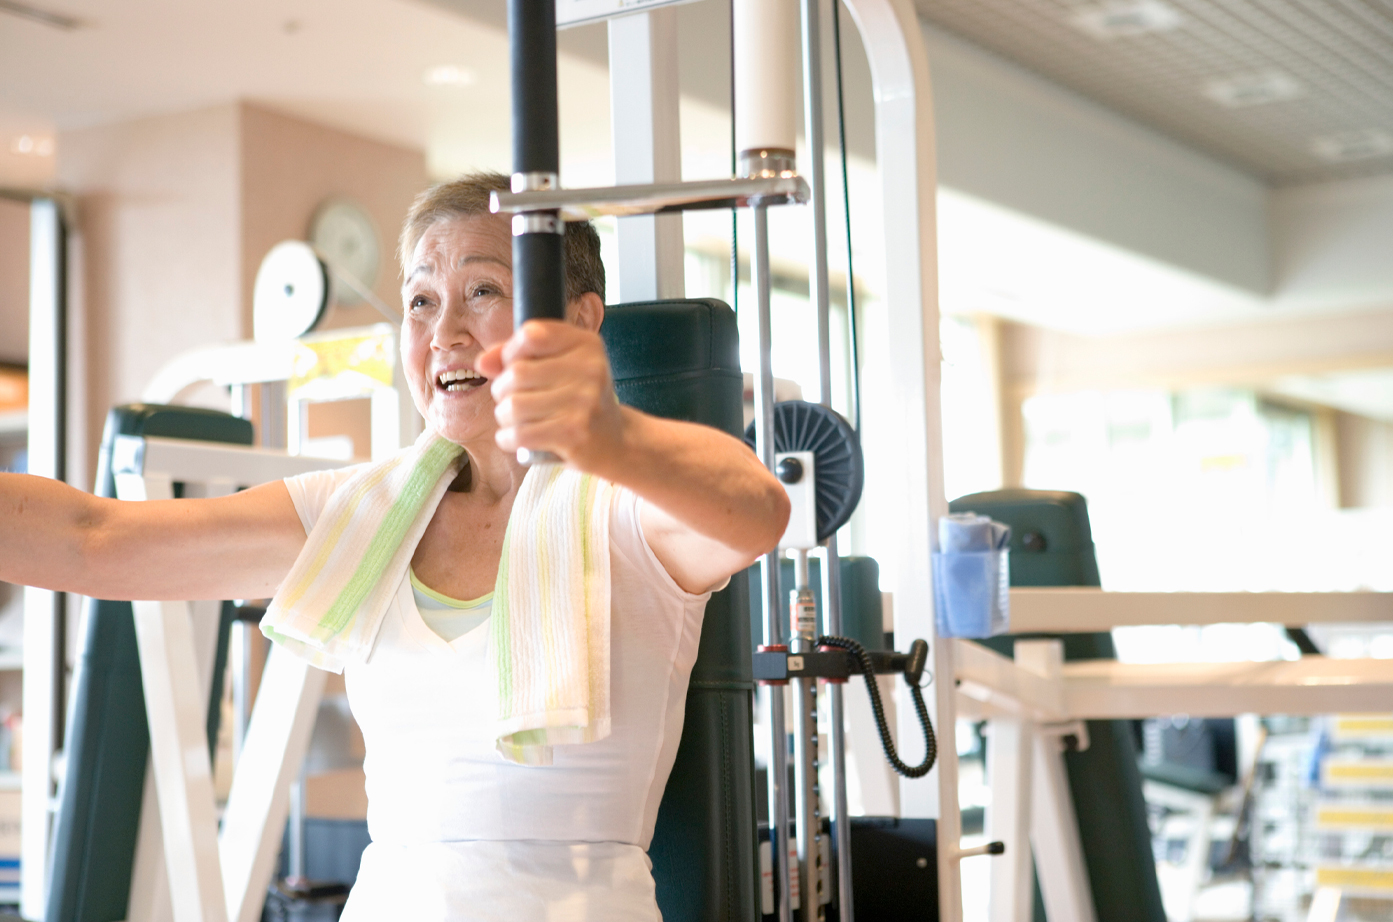 Strength Training Is Vital As You Age